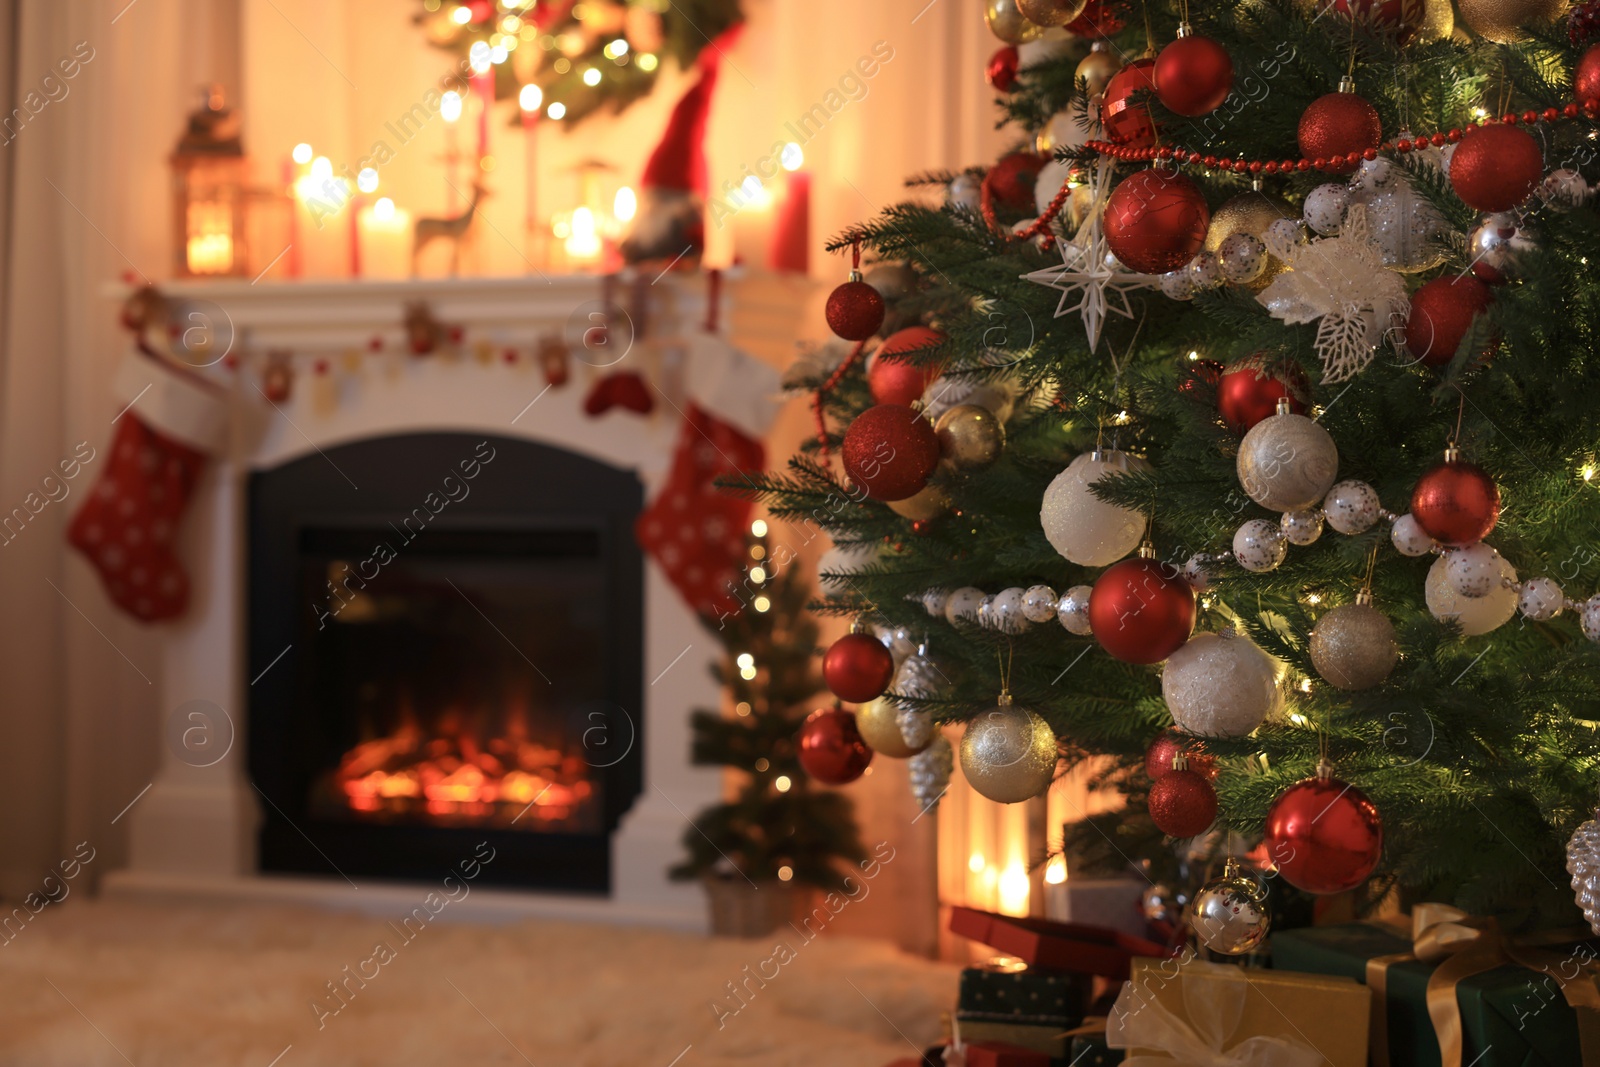 Photo of Festive living room interior with Christmas tree near fireplace